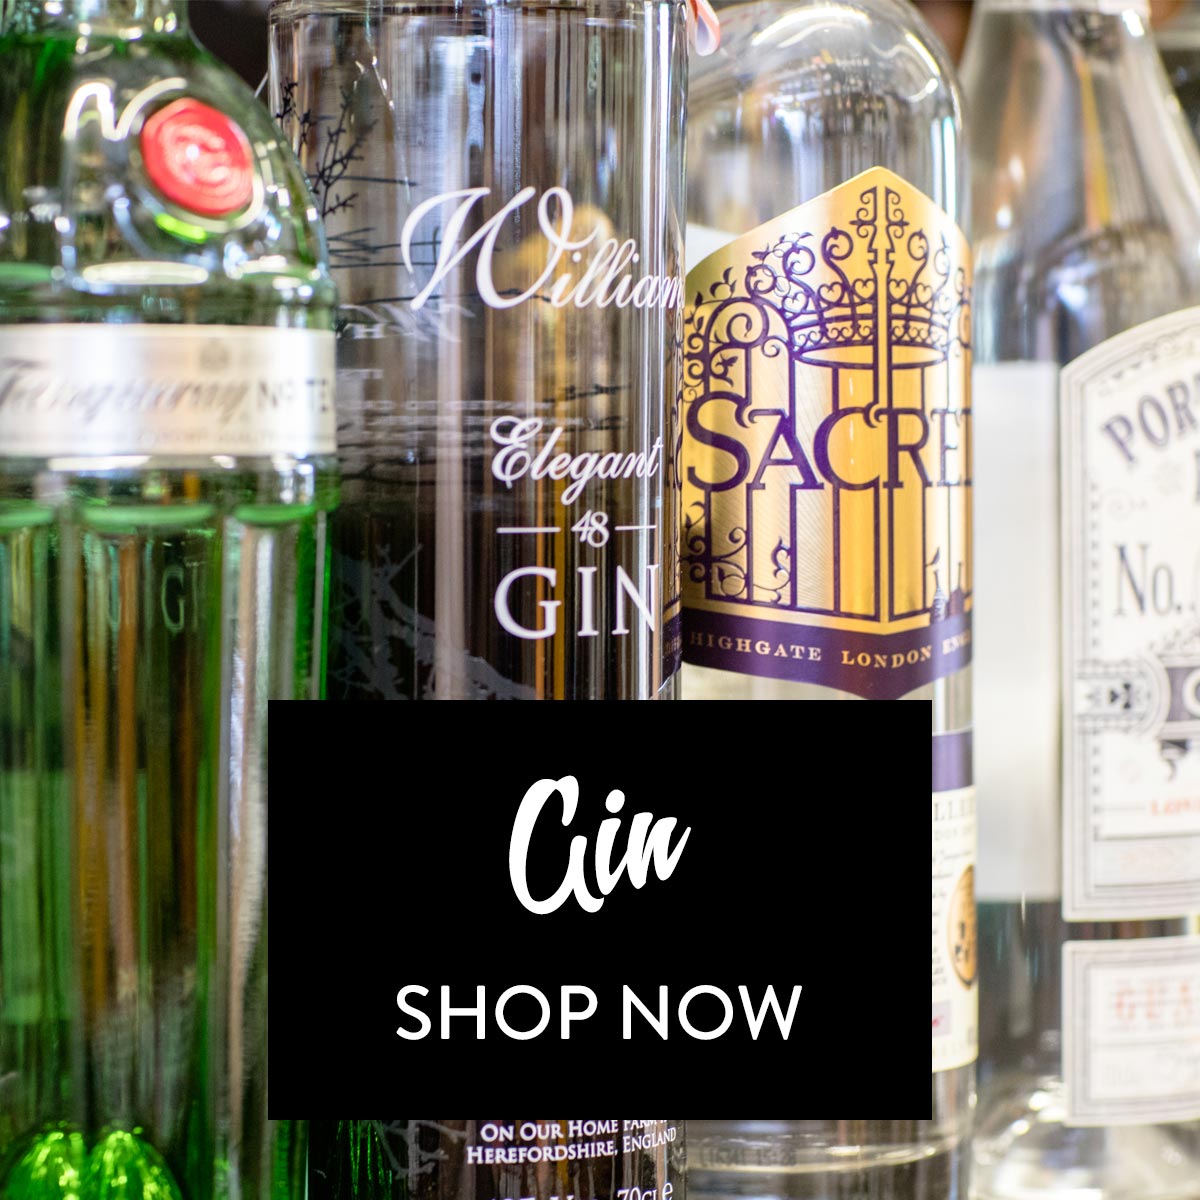 Gin - Shop Now